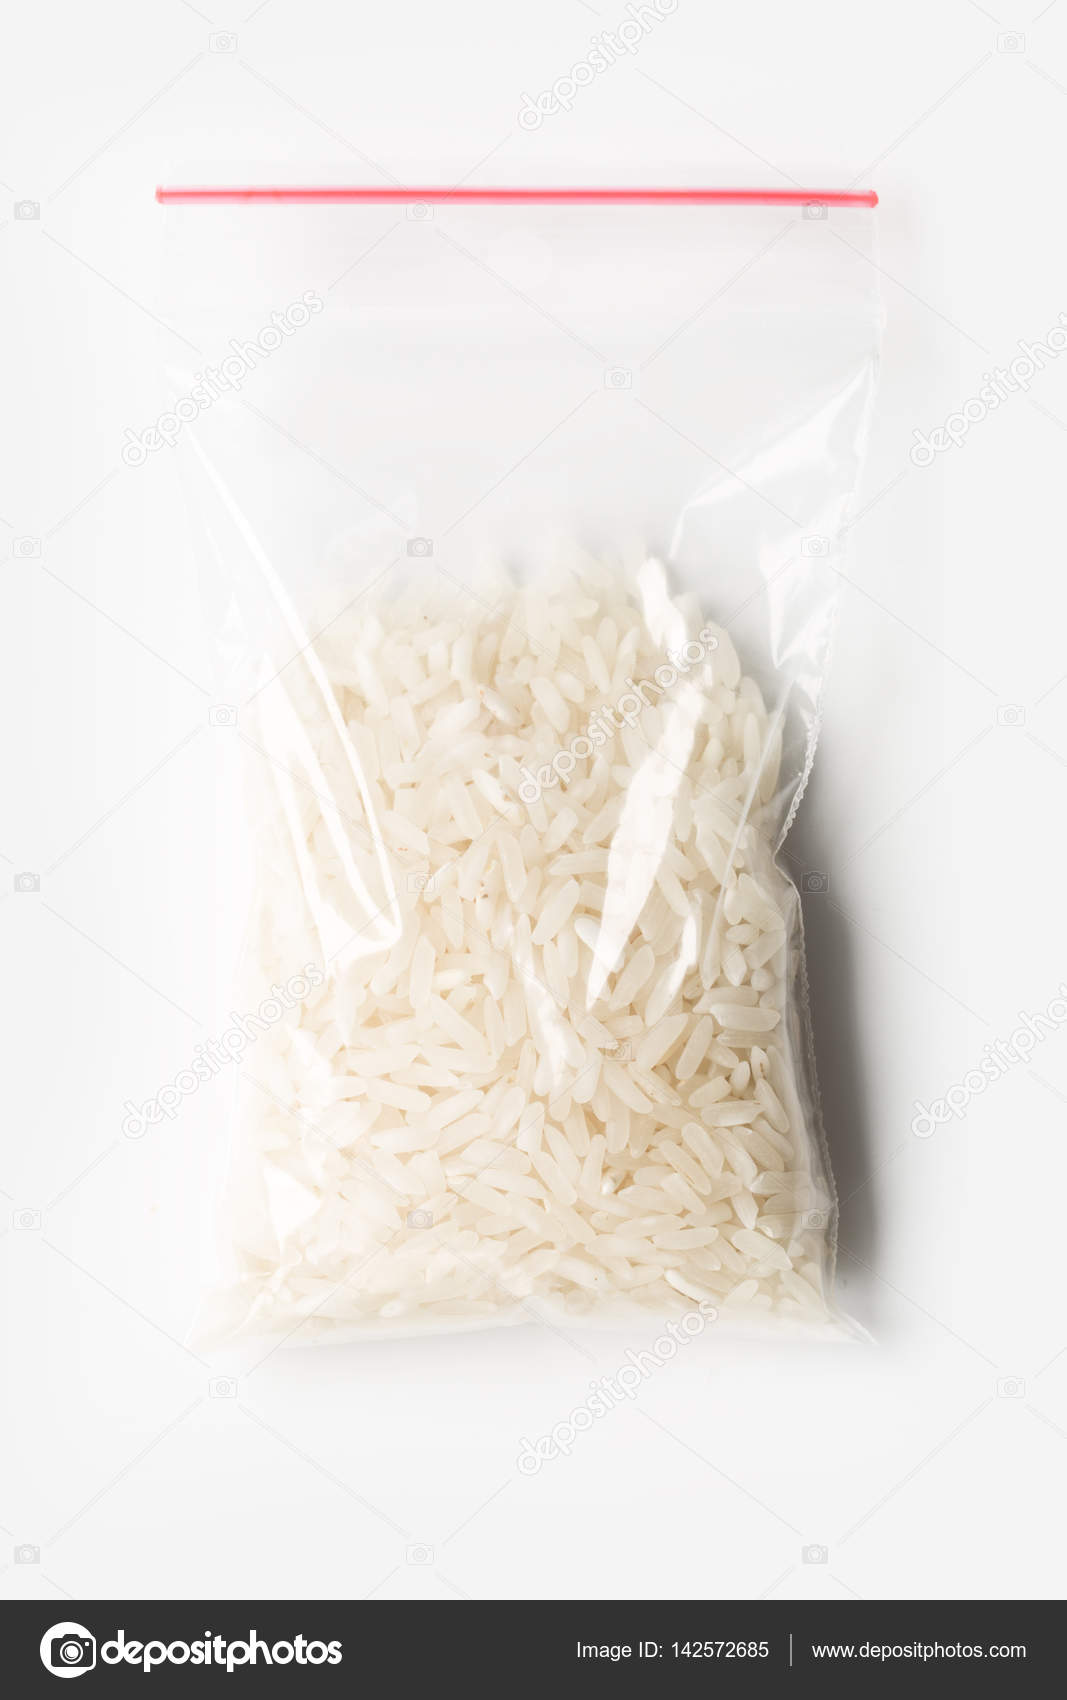 Download Plastic Transparent Zipper Bag With Half Uncooked White Basmati Rice Isolated On White Vacuum Package Mockup With Red Clip Concept Stock Photo Image By C Pavelvinnik 142572685